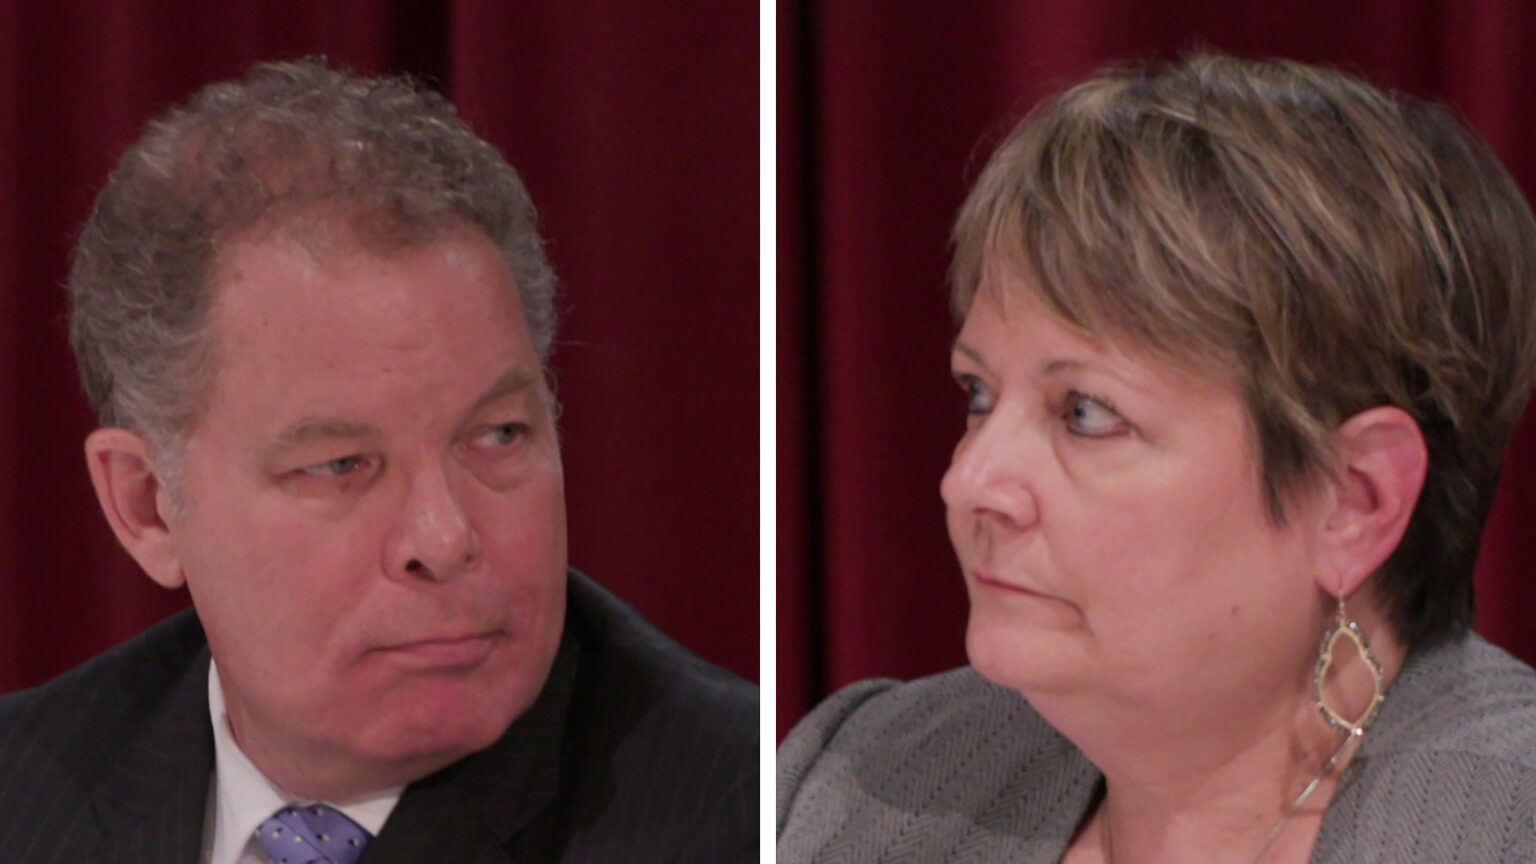 Two side-by-side images show Daniel Kelly looking to his left and Janet Protasiewicz looking to her right.